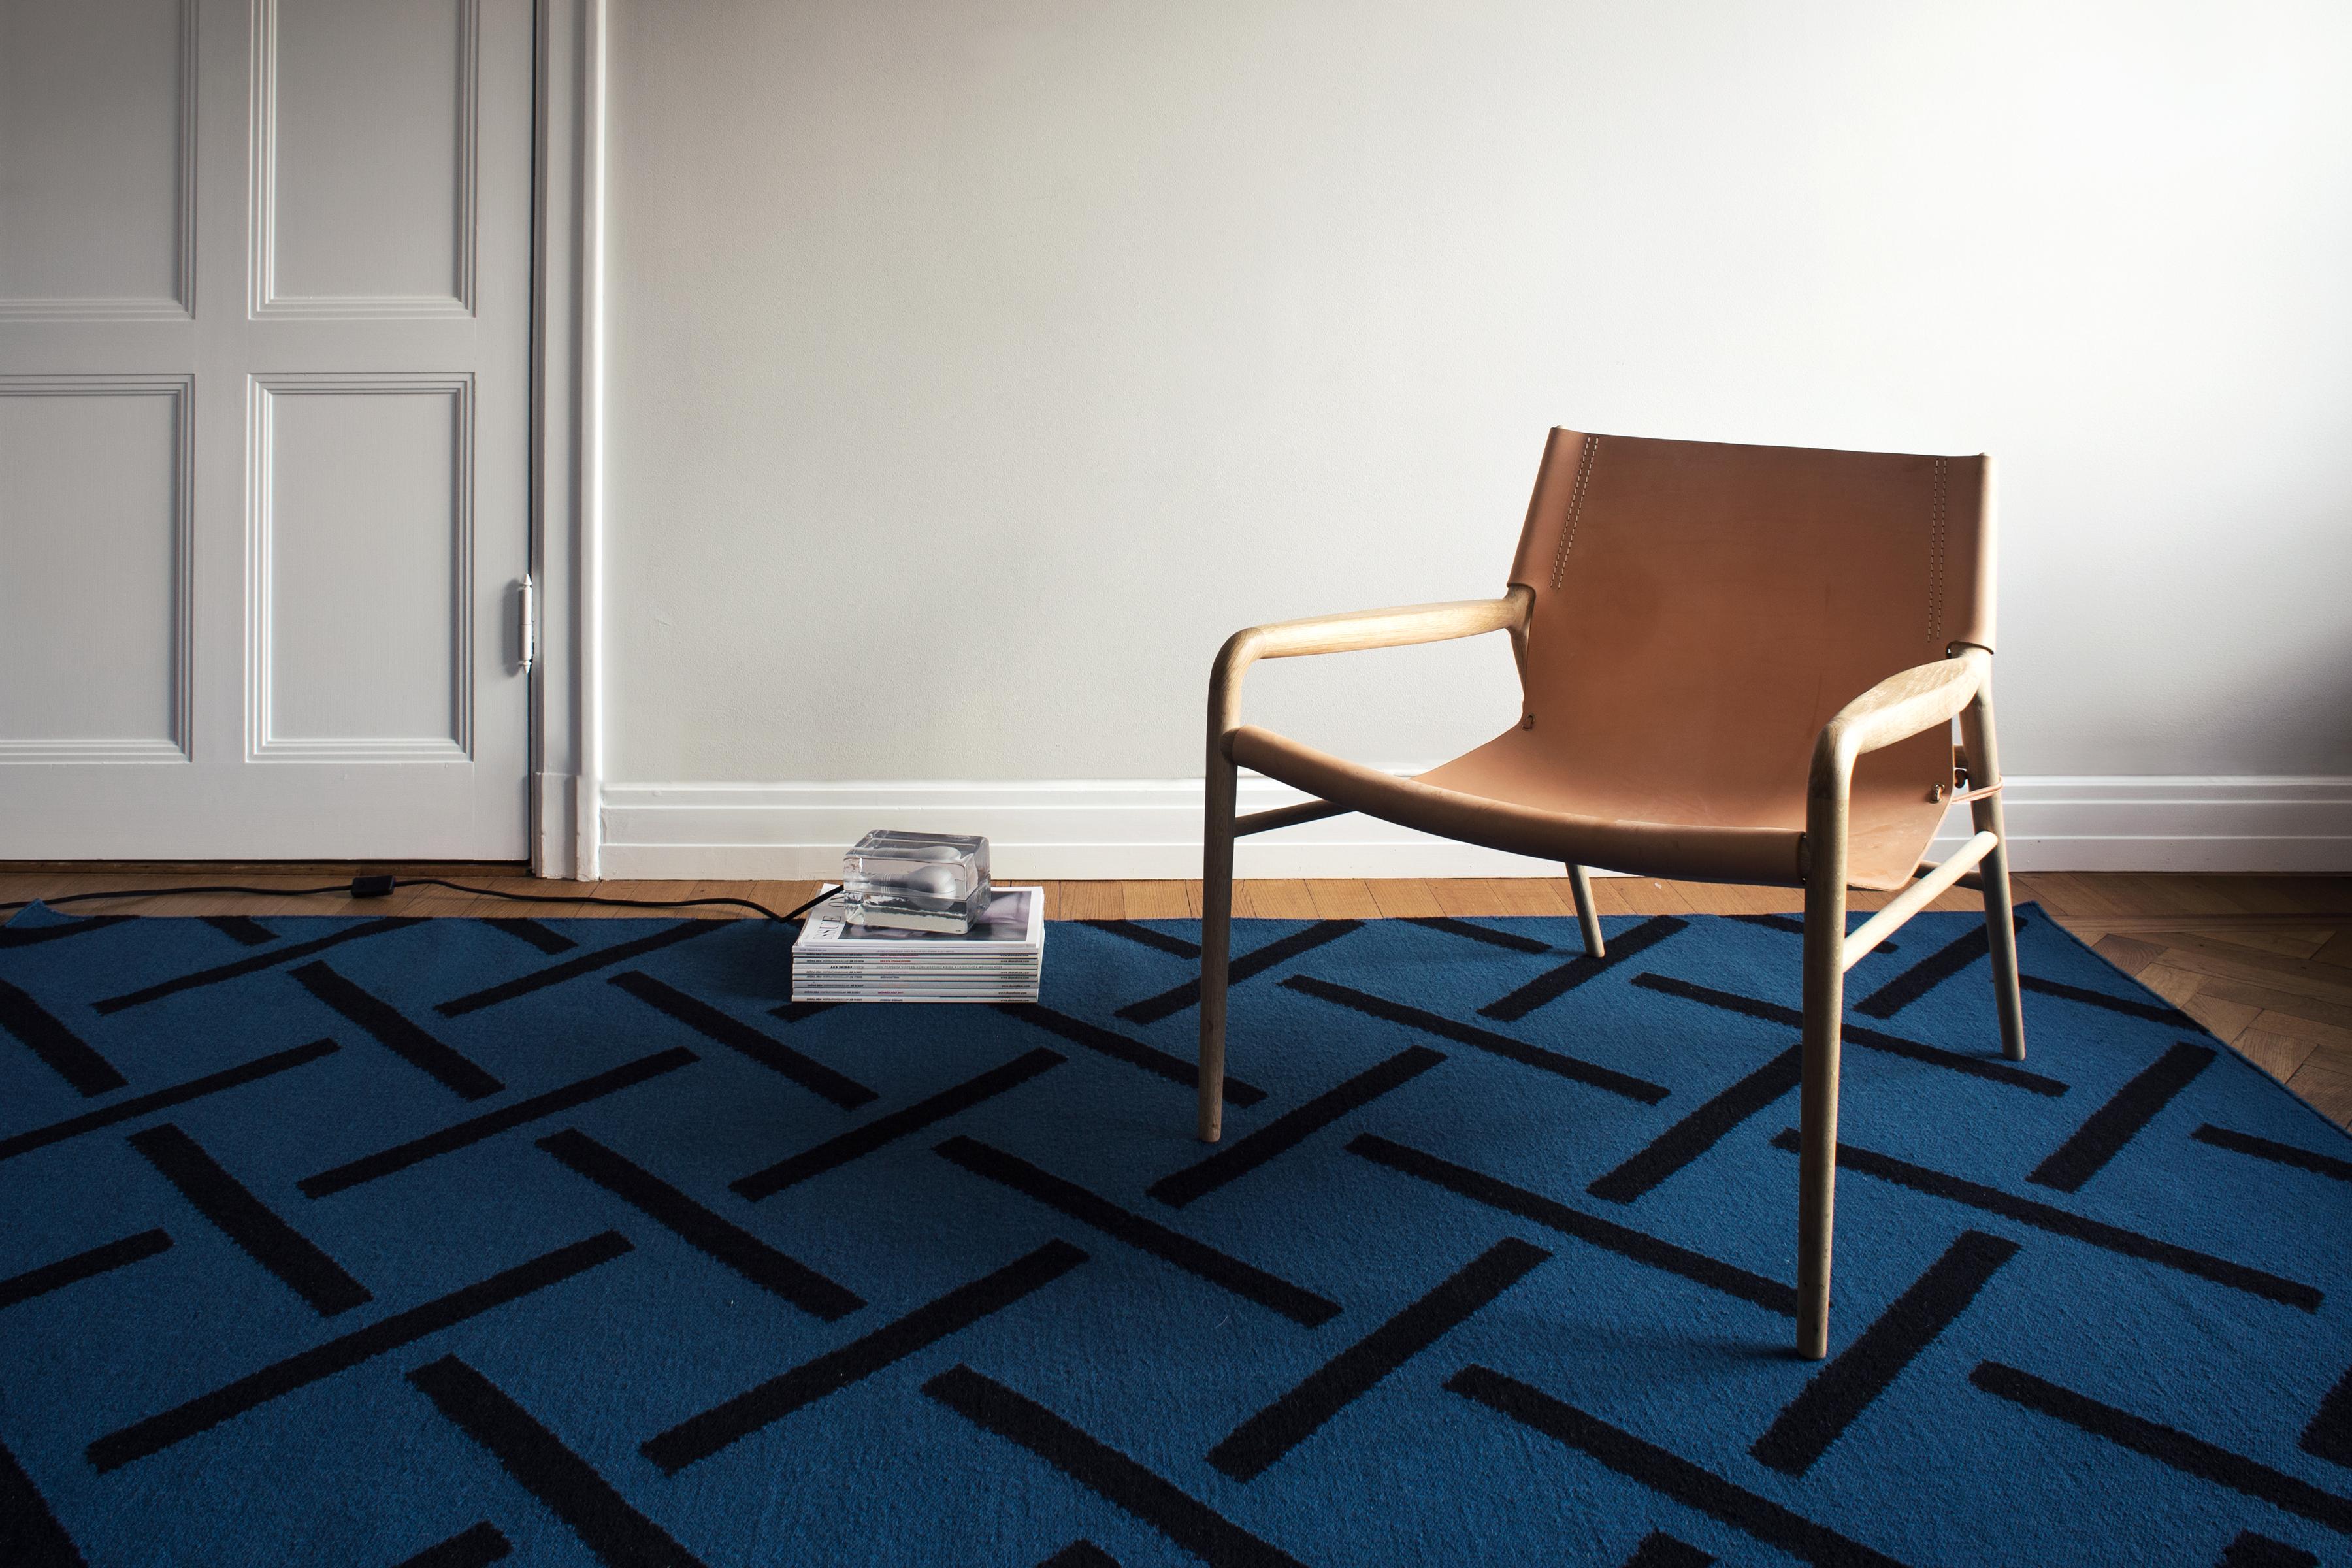 Link Beige is a modern Dhurrie or Kilim rug in Scandinavian design. It is available in different sizes - see customization options below.

The collection is inspired by the floors in the great halls and dining rooms of turn of the century